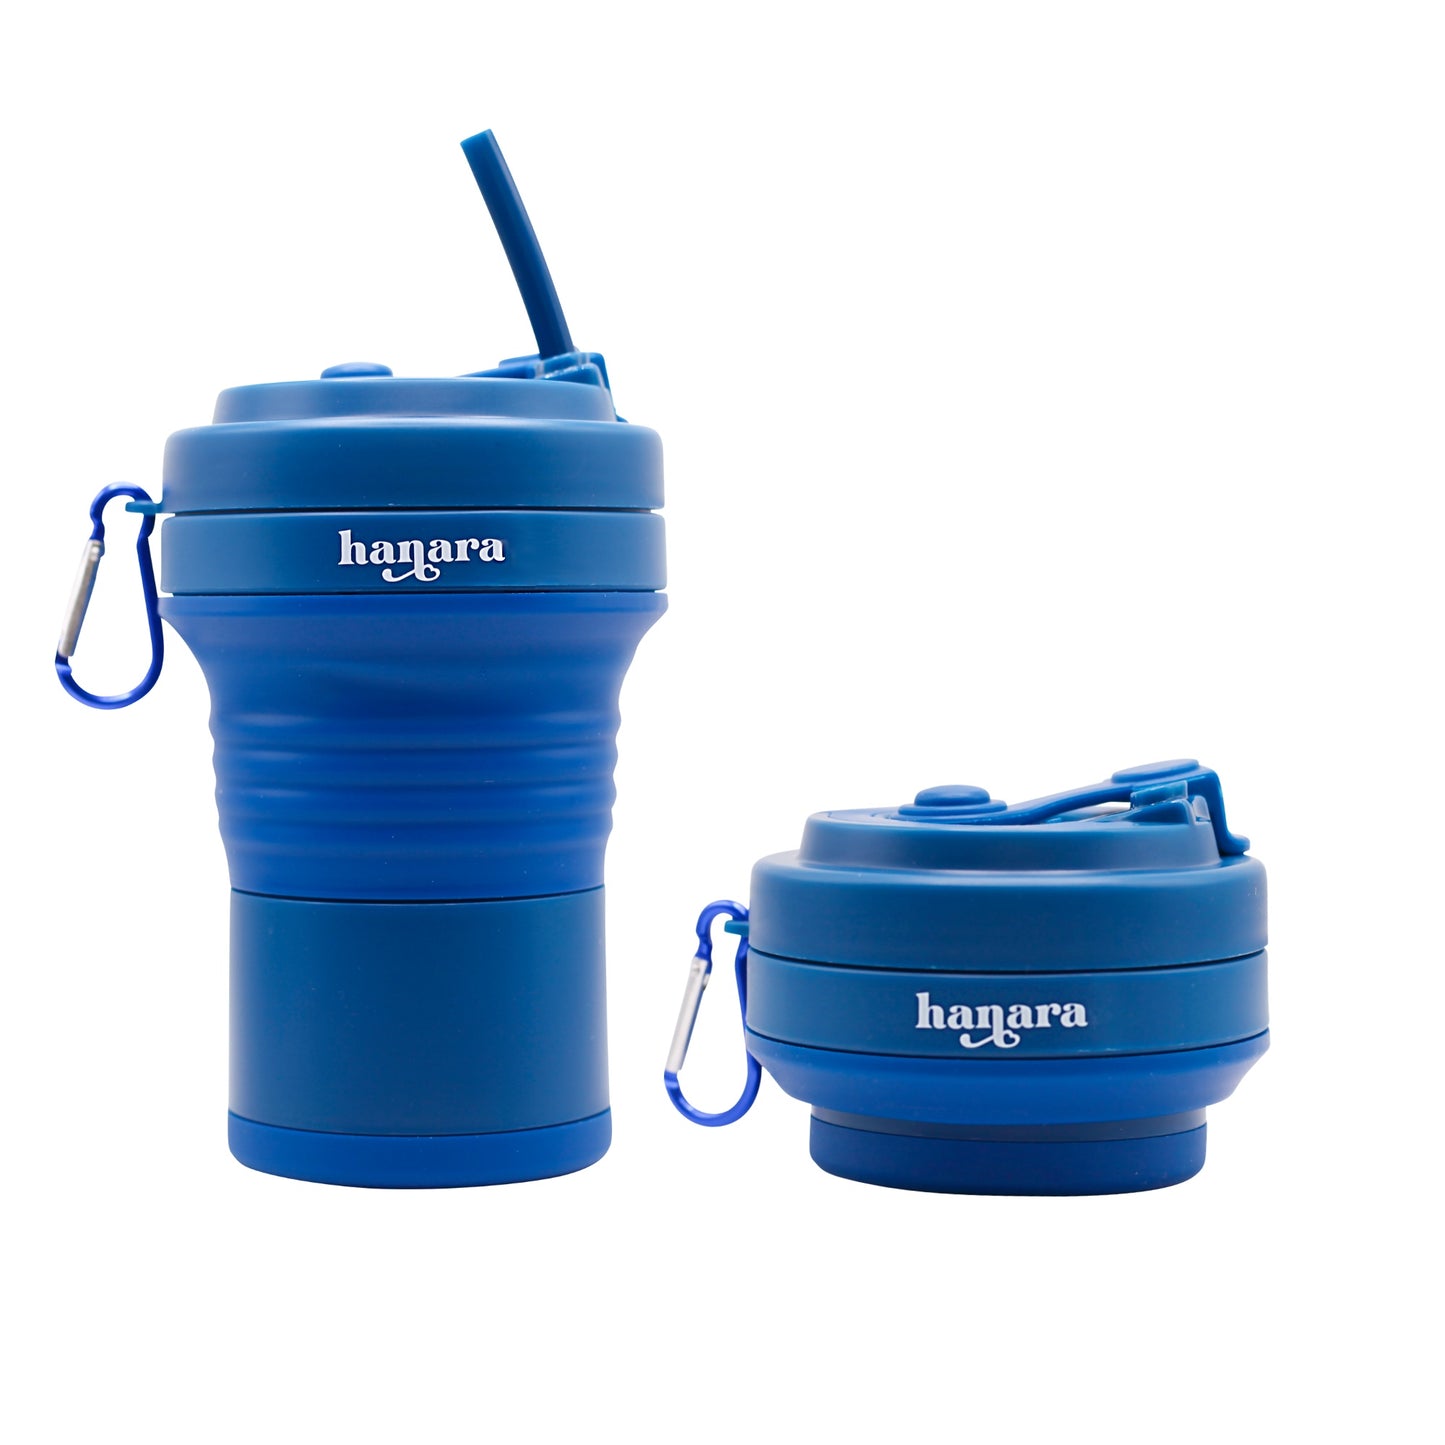 Navy Blue Collapsible Coffee Cups With Reusable Silicone Straw, 18 Oz / 550 Ml